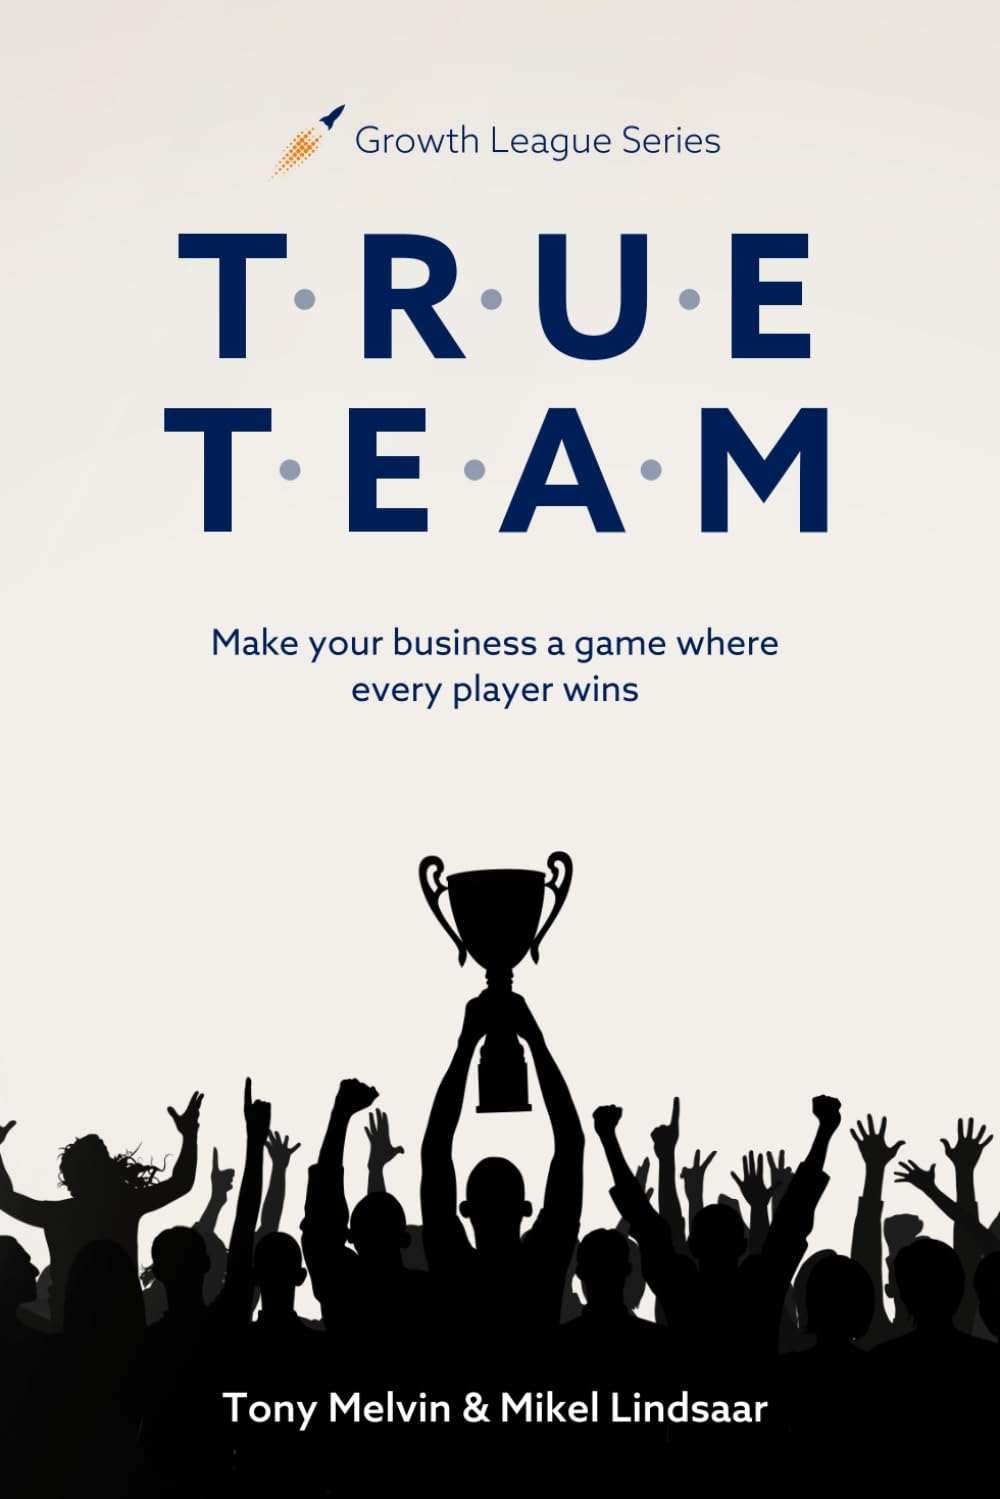 Image of the TRUE TEAM book cover